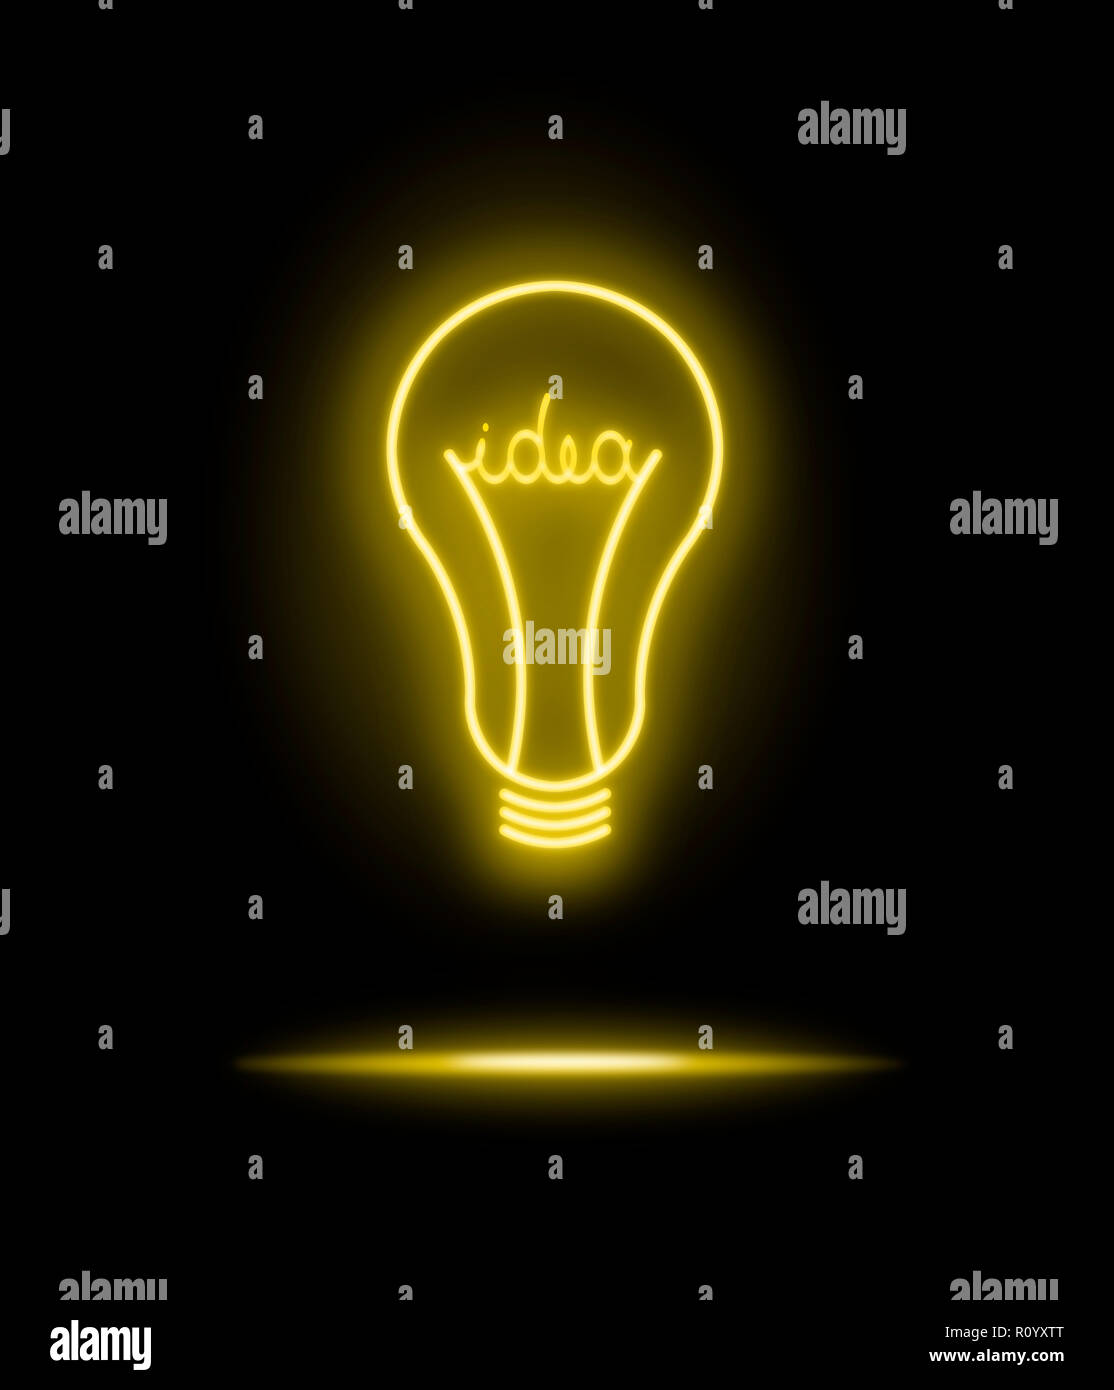 Glowing yellow neon electric light bulb symbol with the word idea, against black background Stock Photo